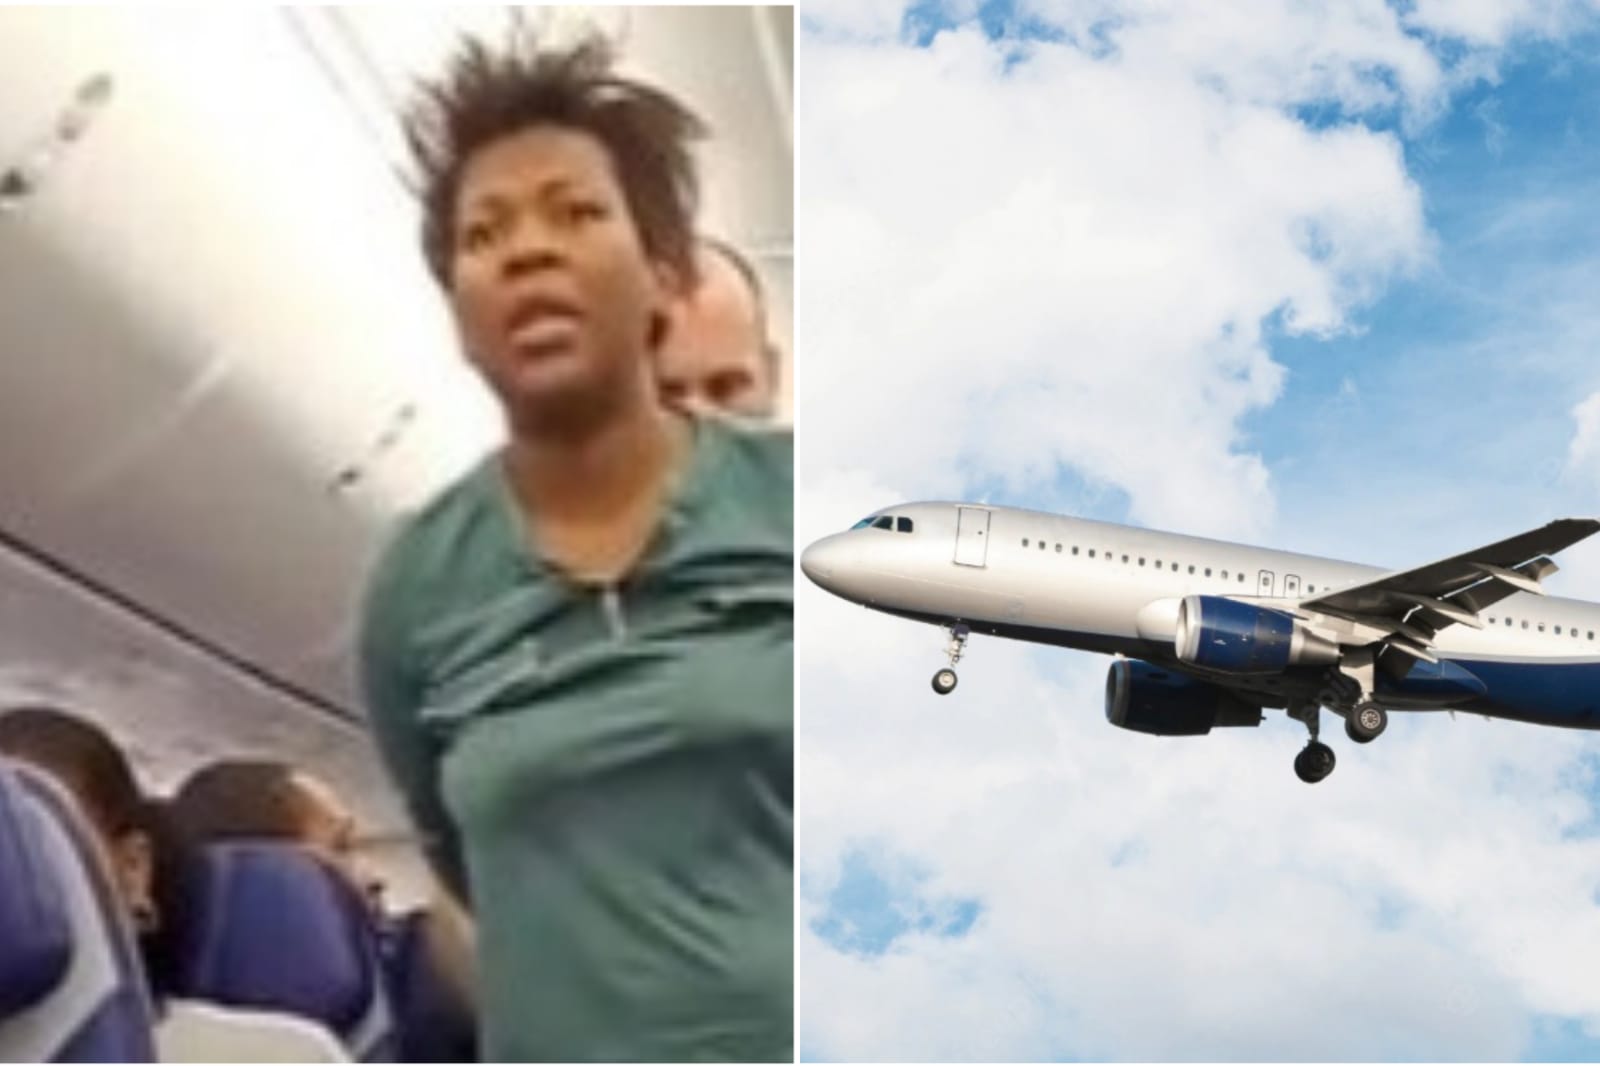 The passenger on the plane is arrested after doing what Jesus “said” and endangering the flight